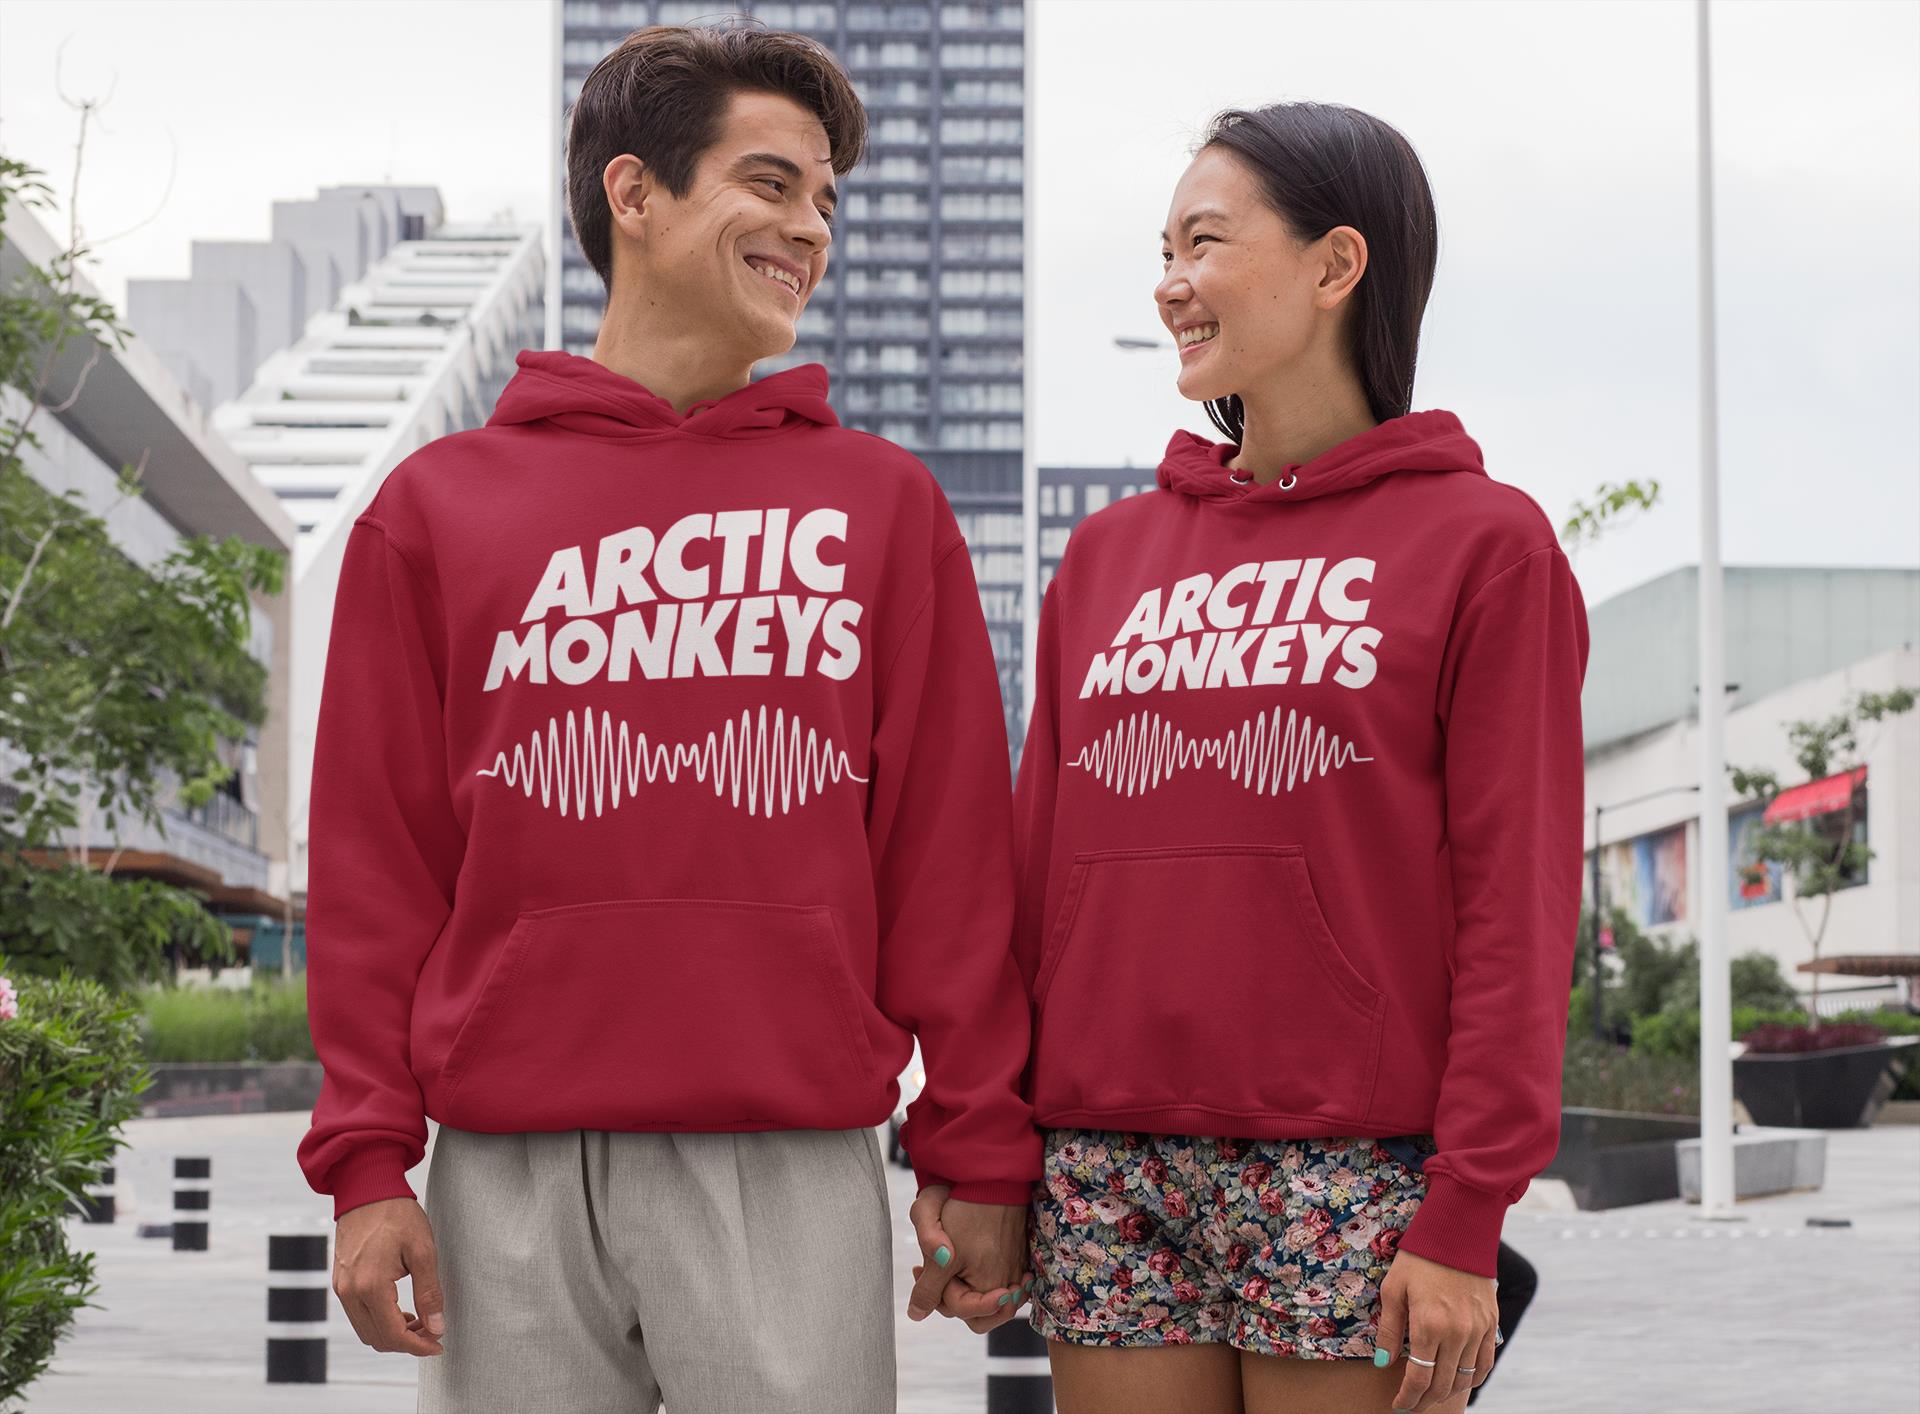 Artic Monkeys Couples Hoodie For Matching Lover